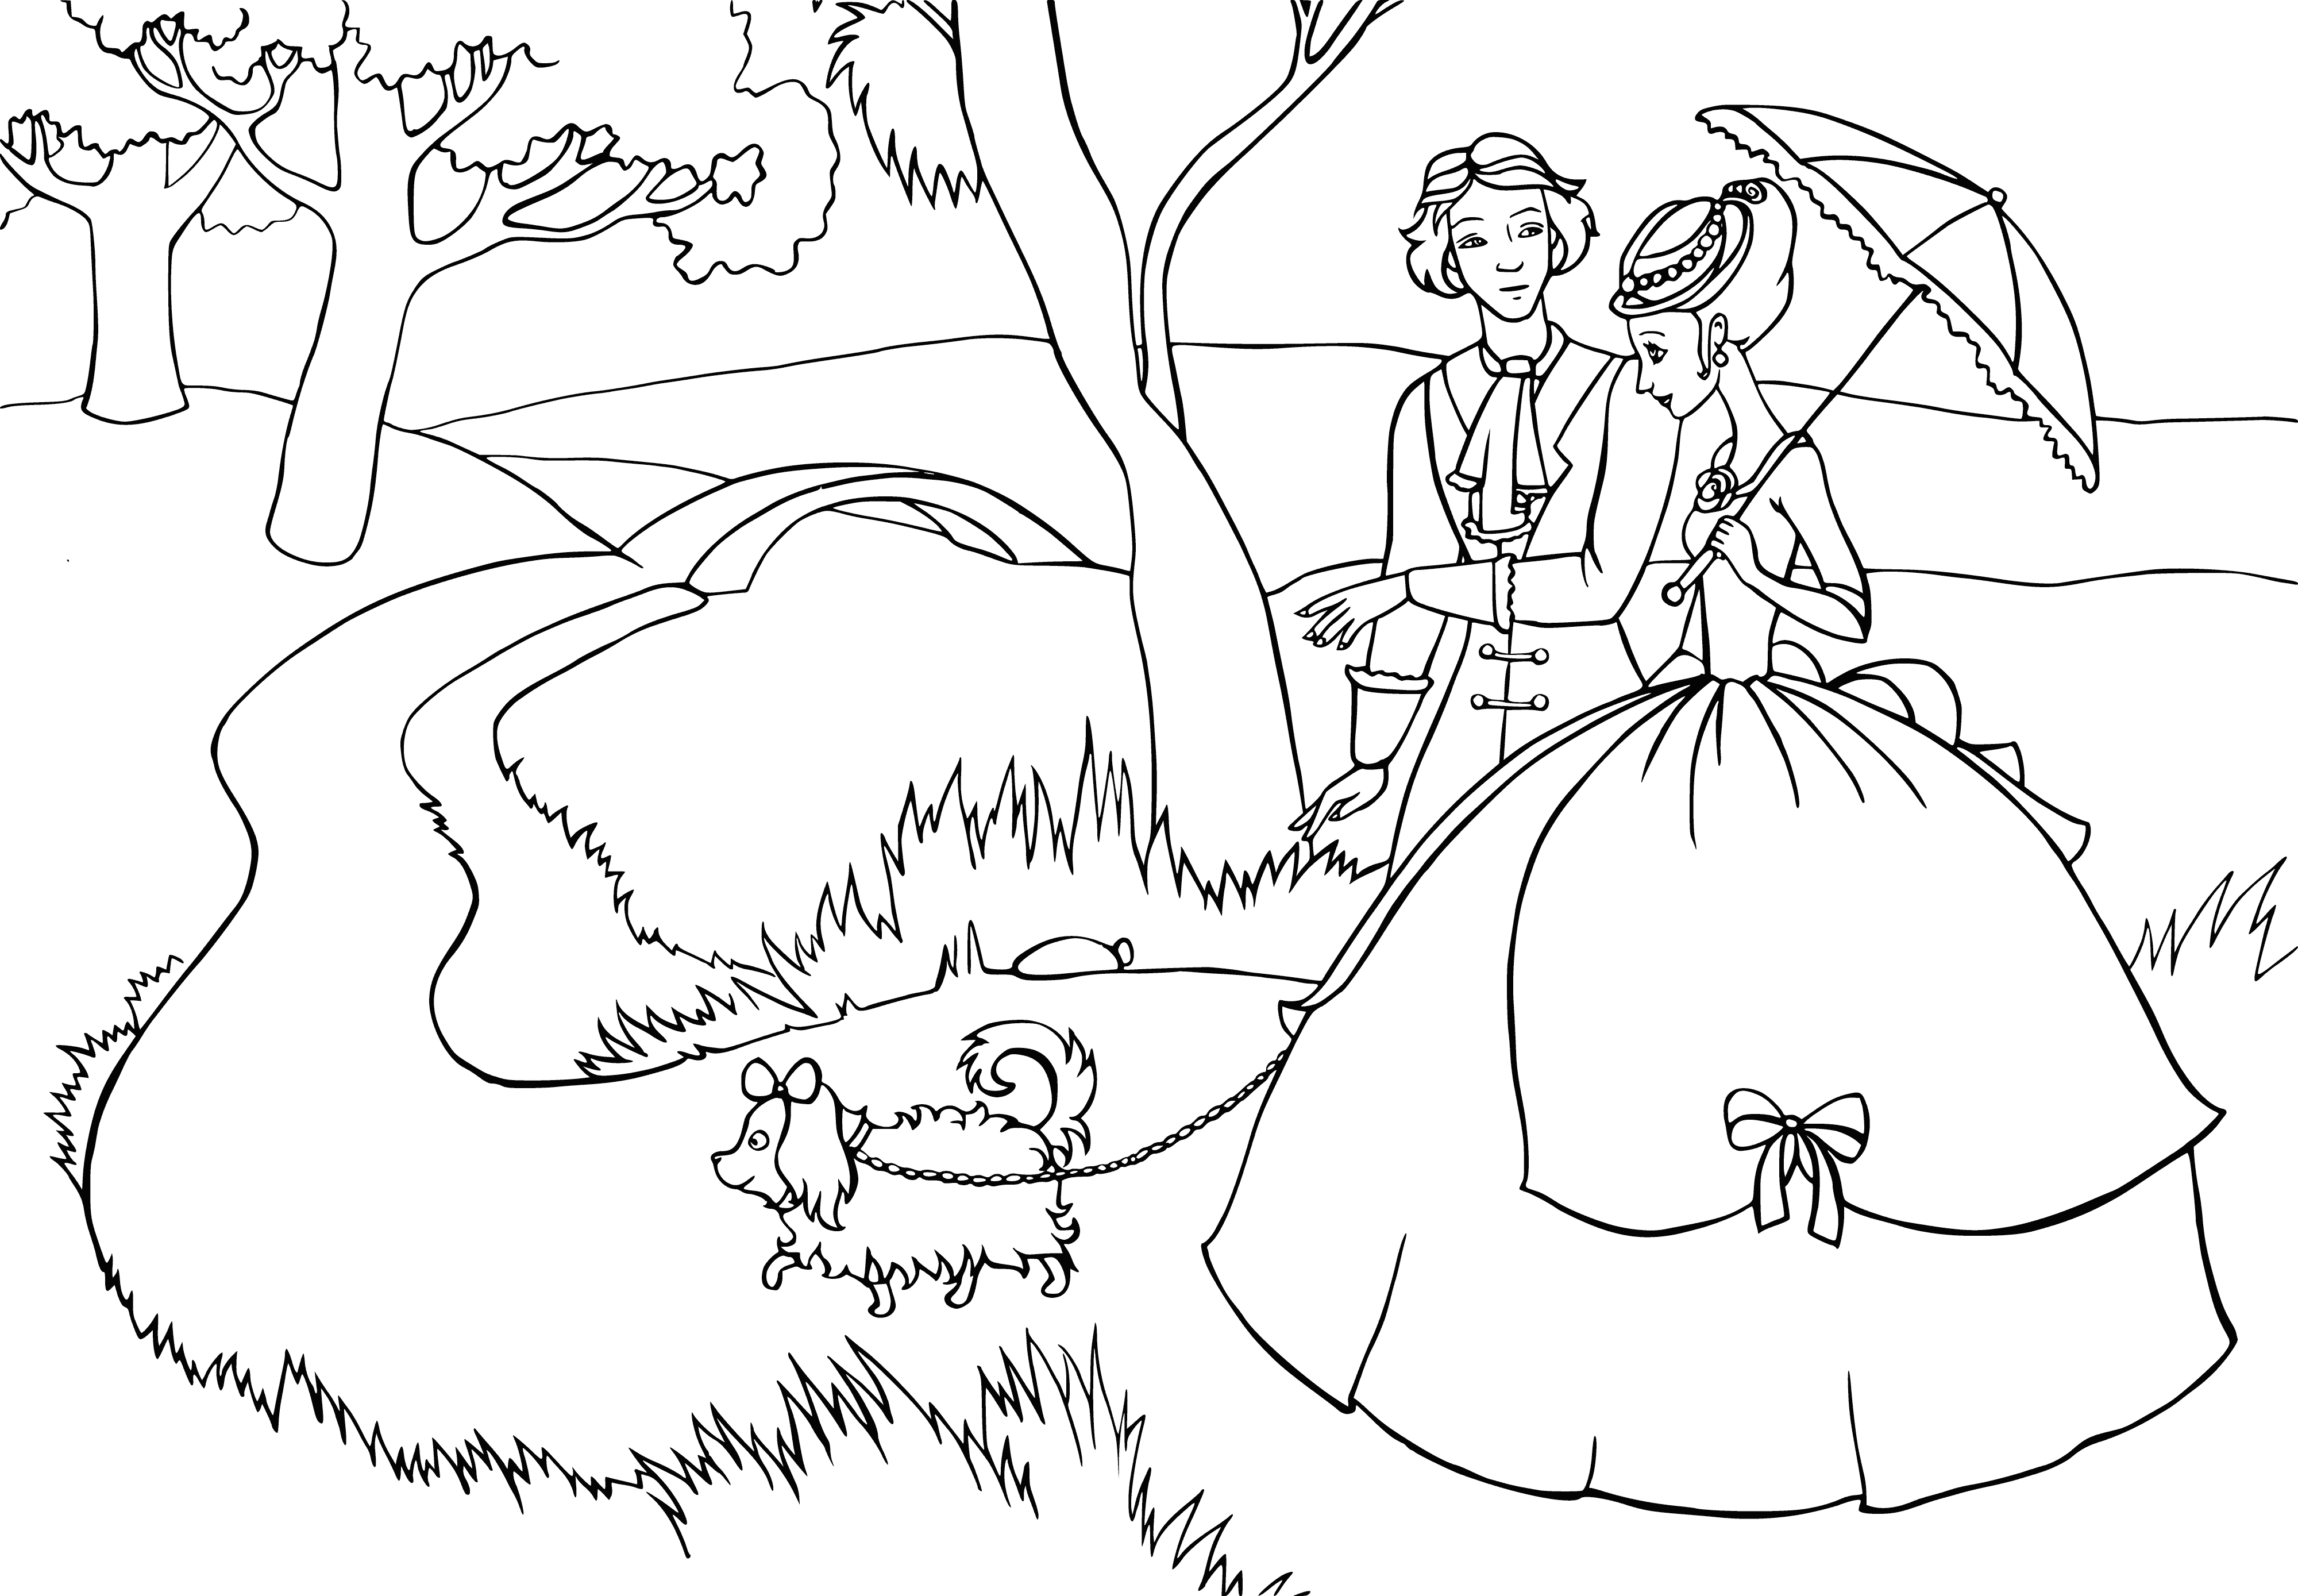 coloring page: The fairy kingdom is a magical place of tall, silvery trees with delicate, colorful leaves; a gentle breeze, warm sun, and blooming flowers; with butterflies flitting around.